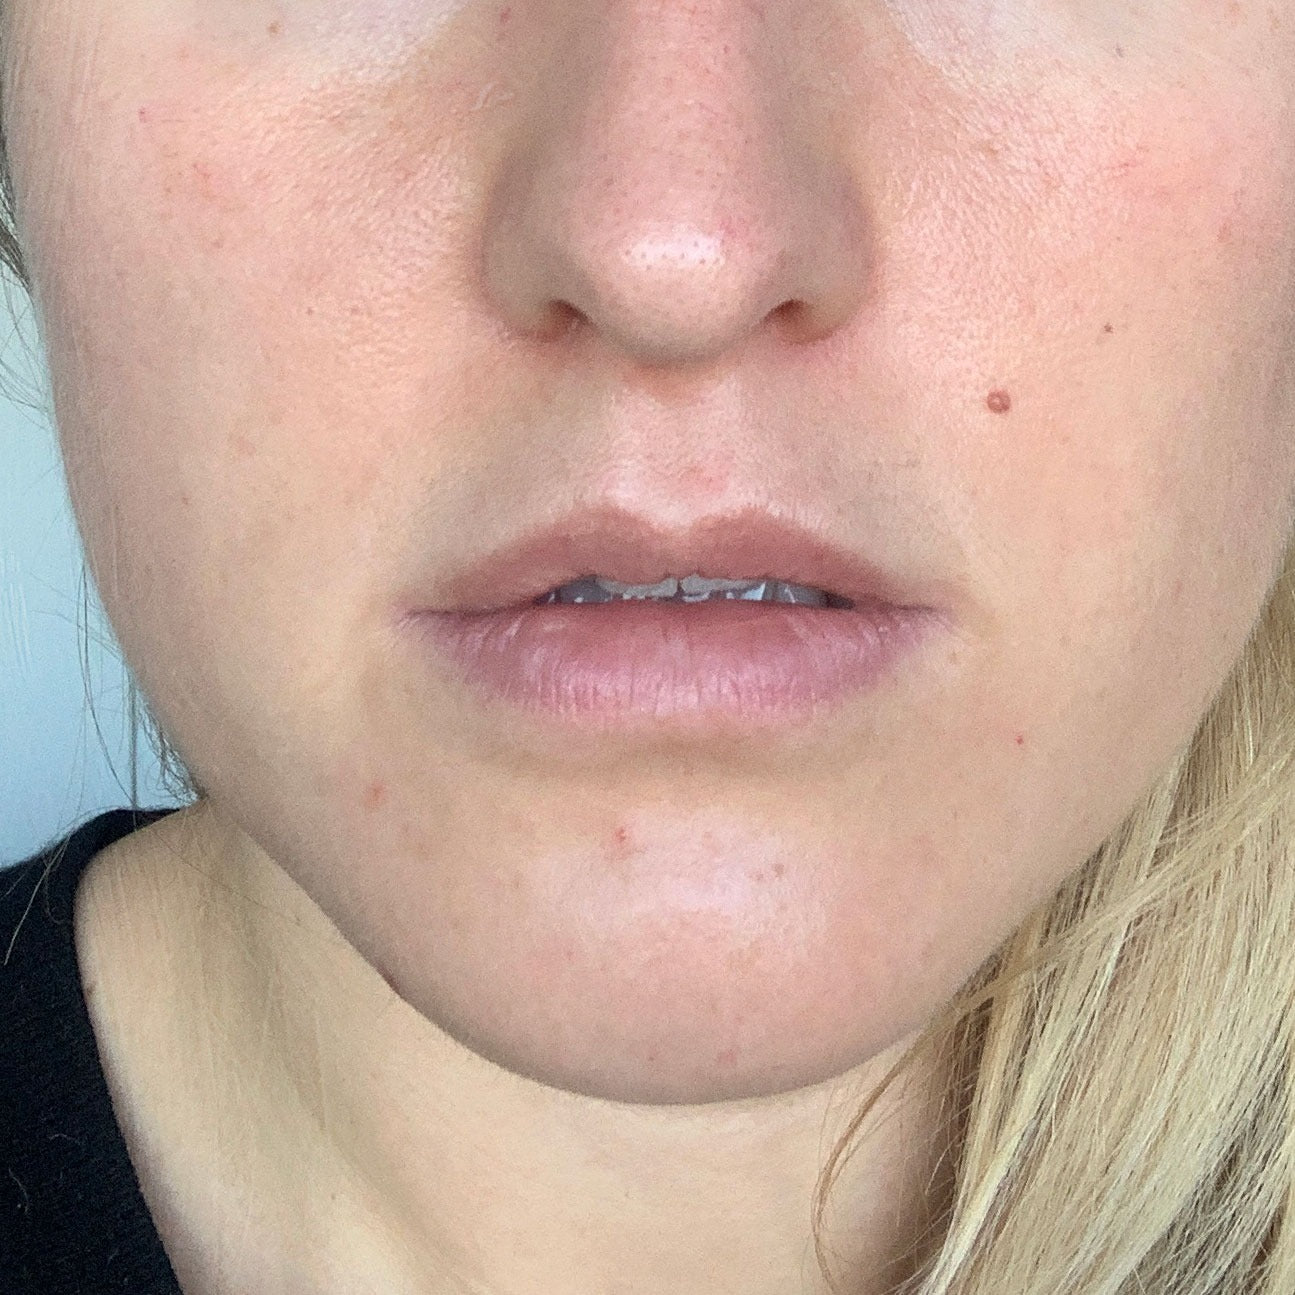 close-up image of a person's face in a after picture to showcase their improved skin condition after treatment